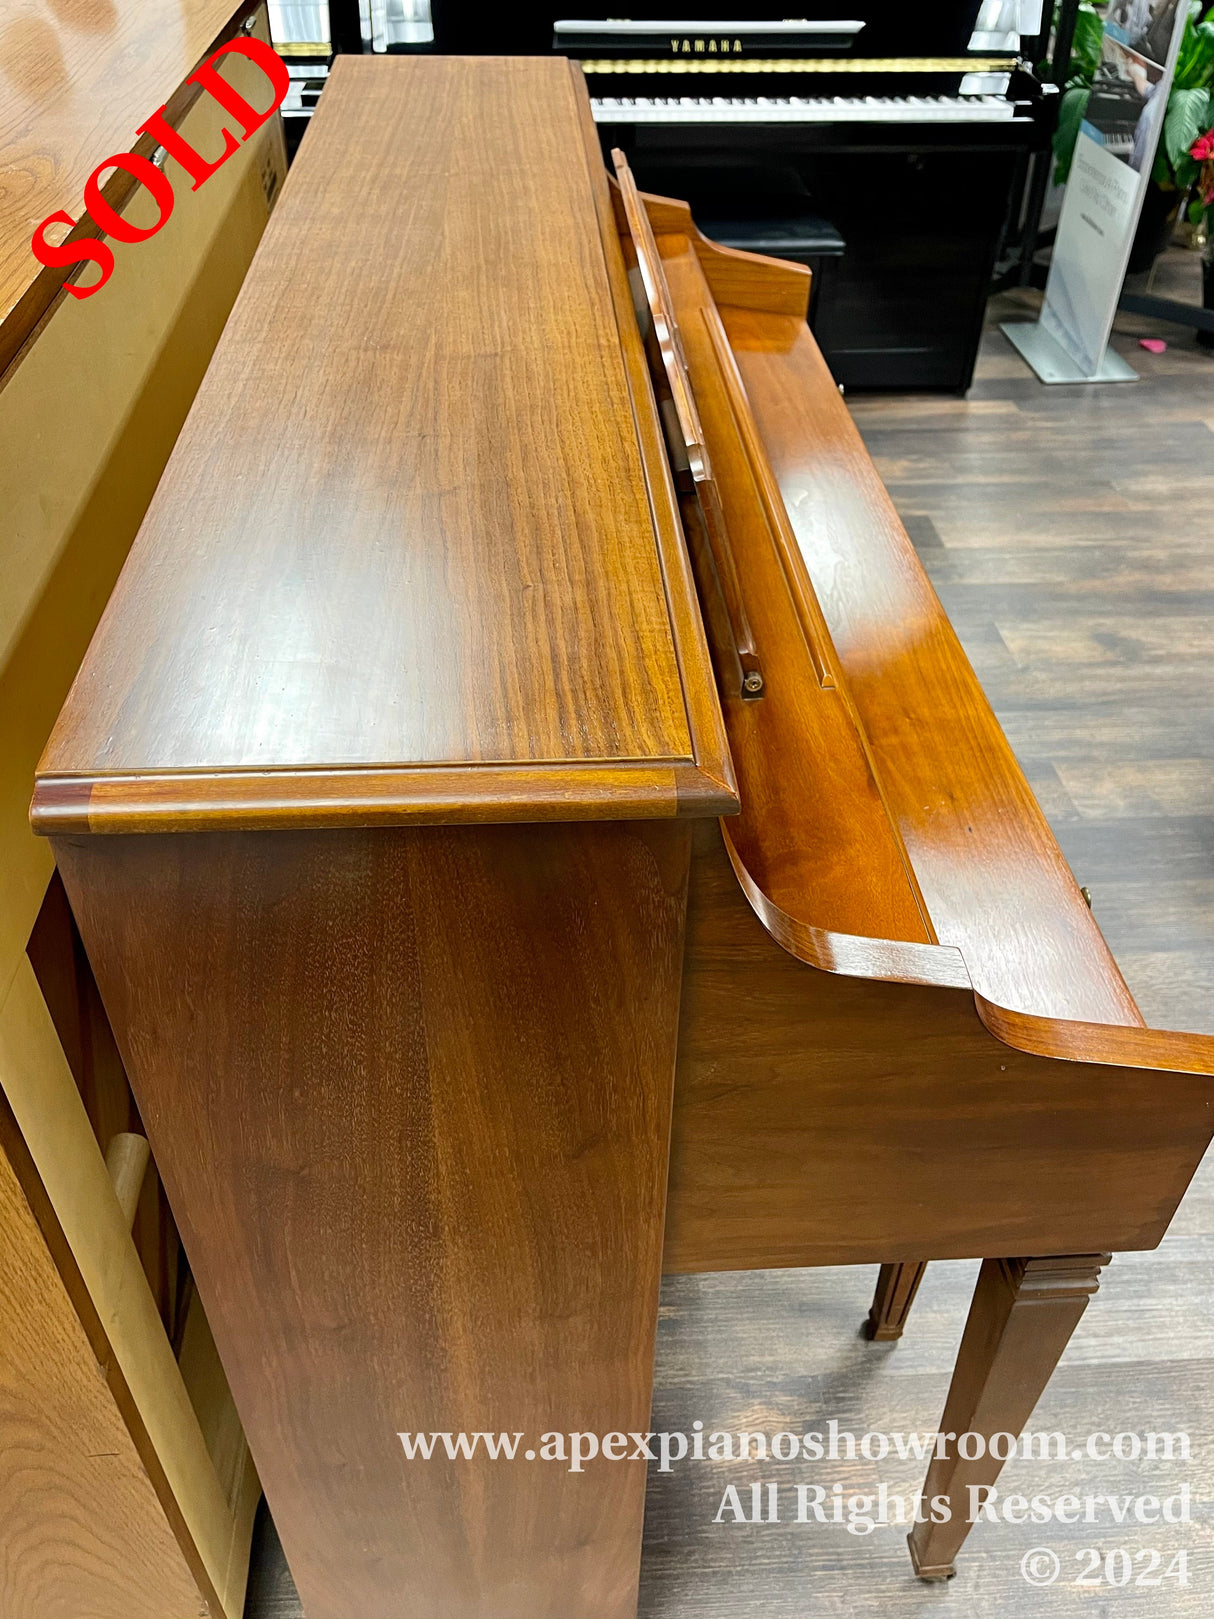 A close-up view of two upright pianos with rich wooden finishes displayed in a showroom — the closest piano has a smooth, reflective brown surface and is positioned in front of another piano with a black and white keyboard visible in the background.